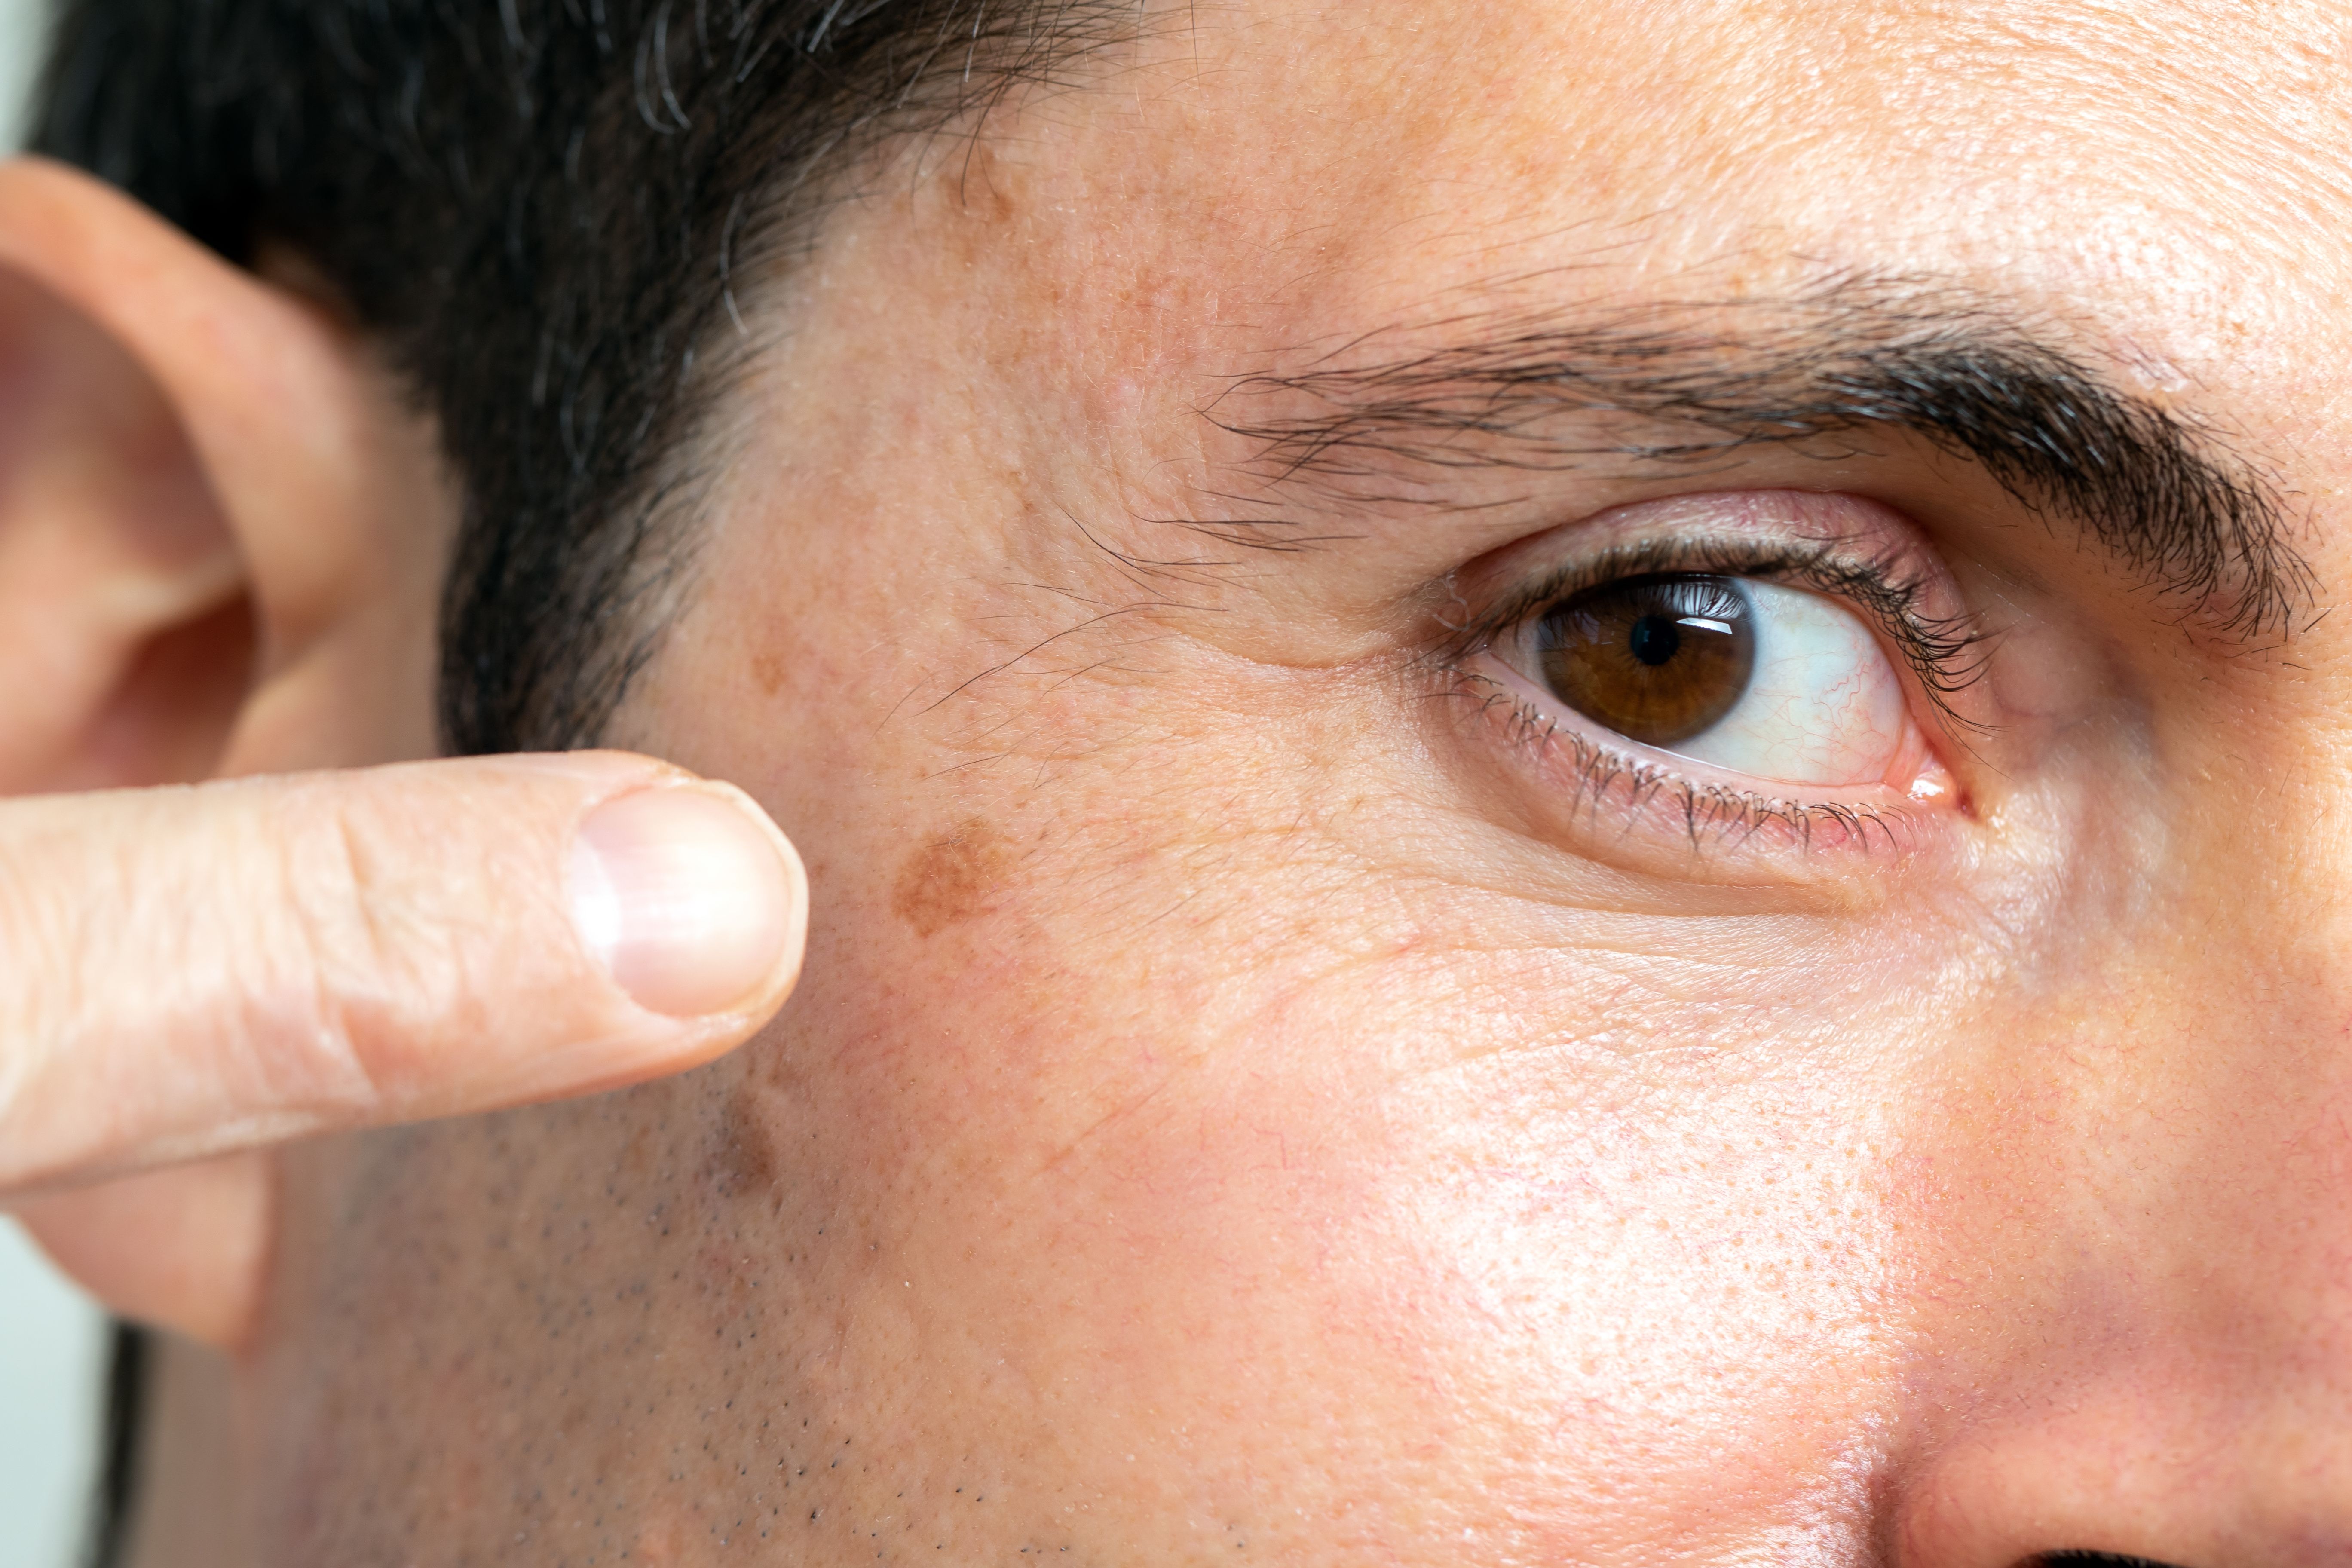 Harnessing the Immune System to Fight Basal Cell Carcinoma: What are the Risks?